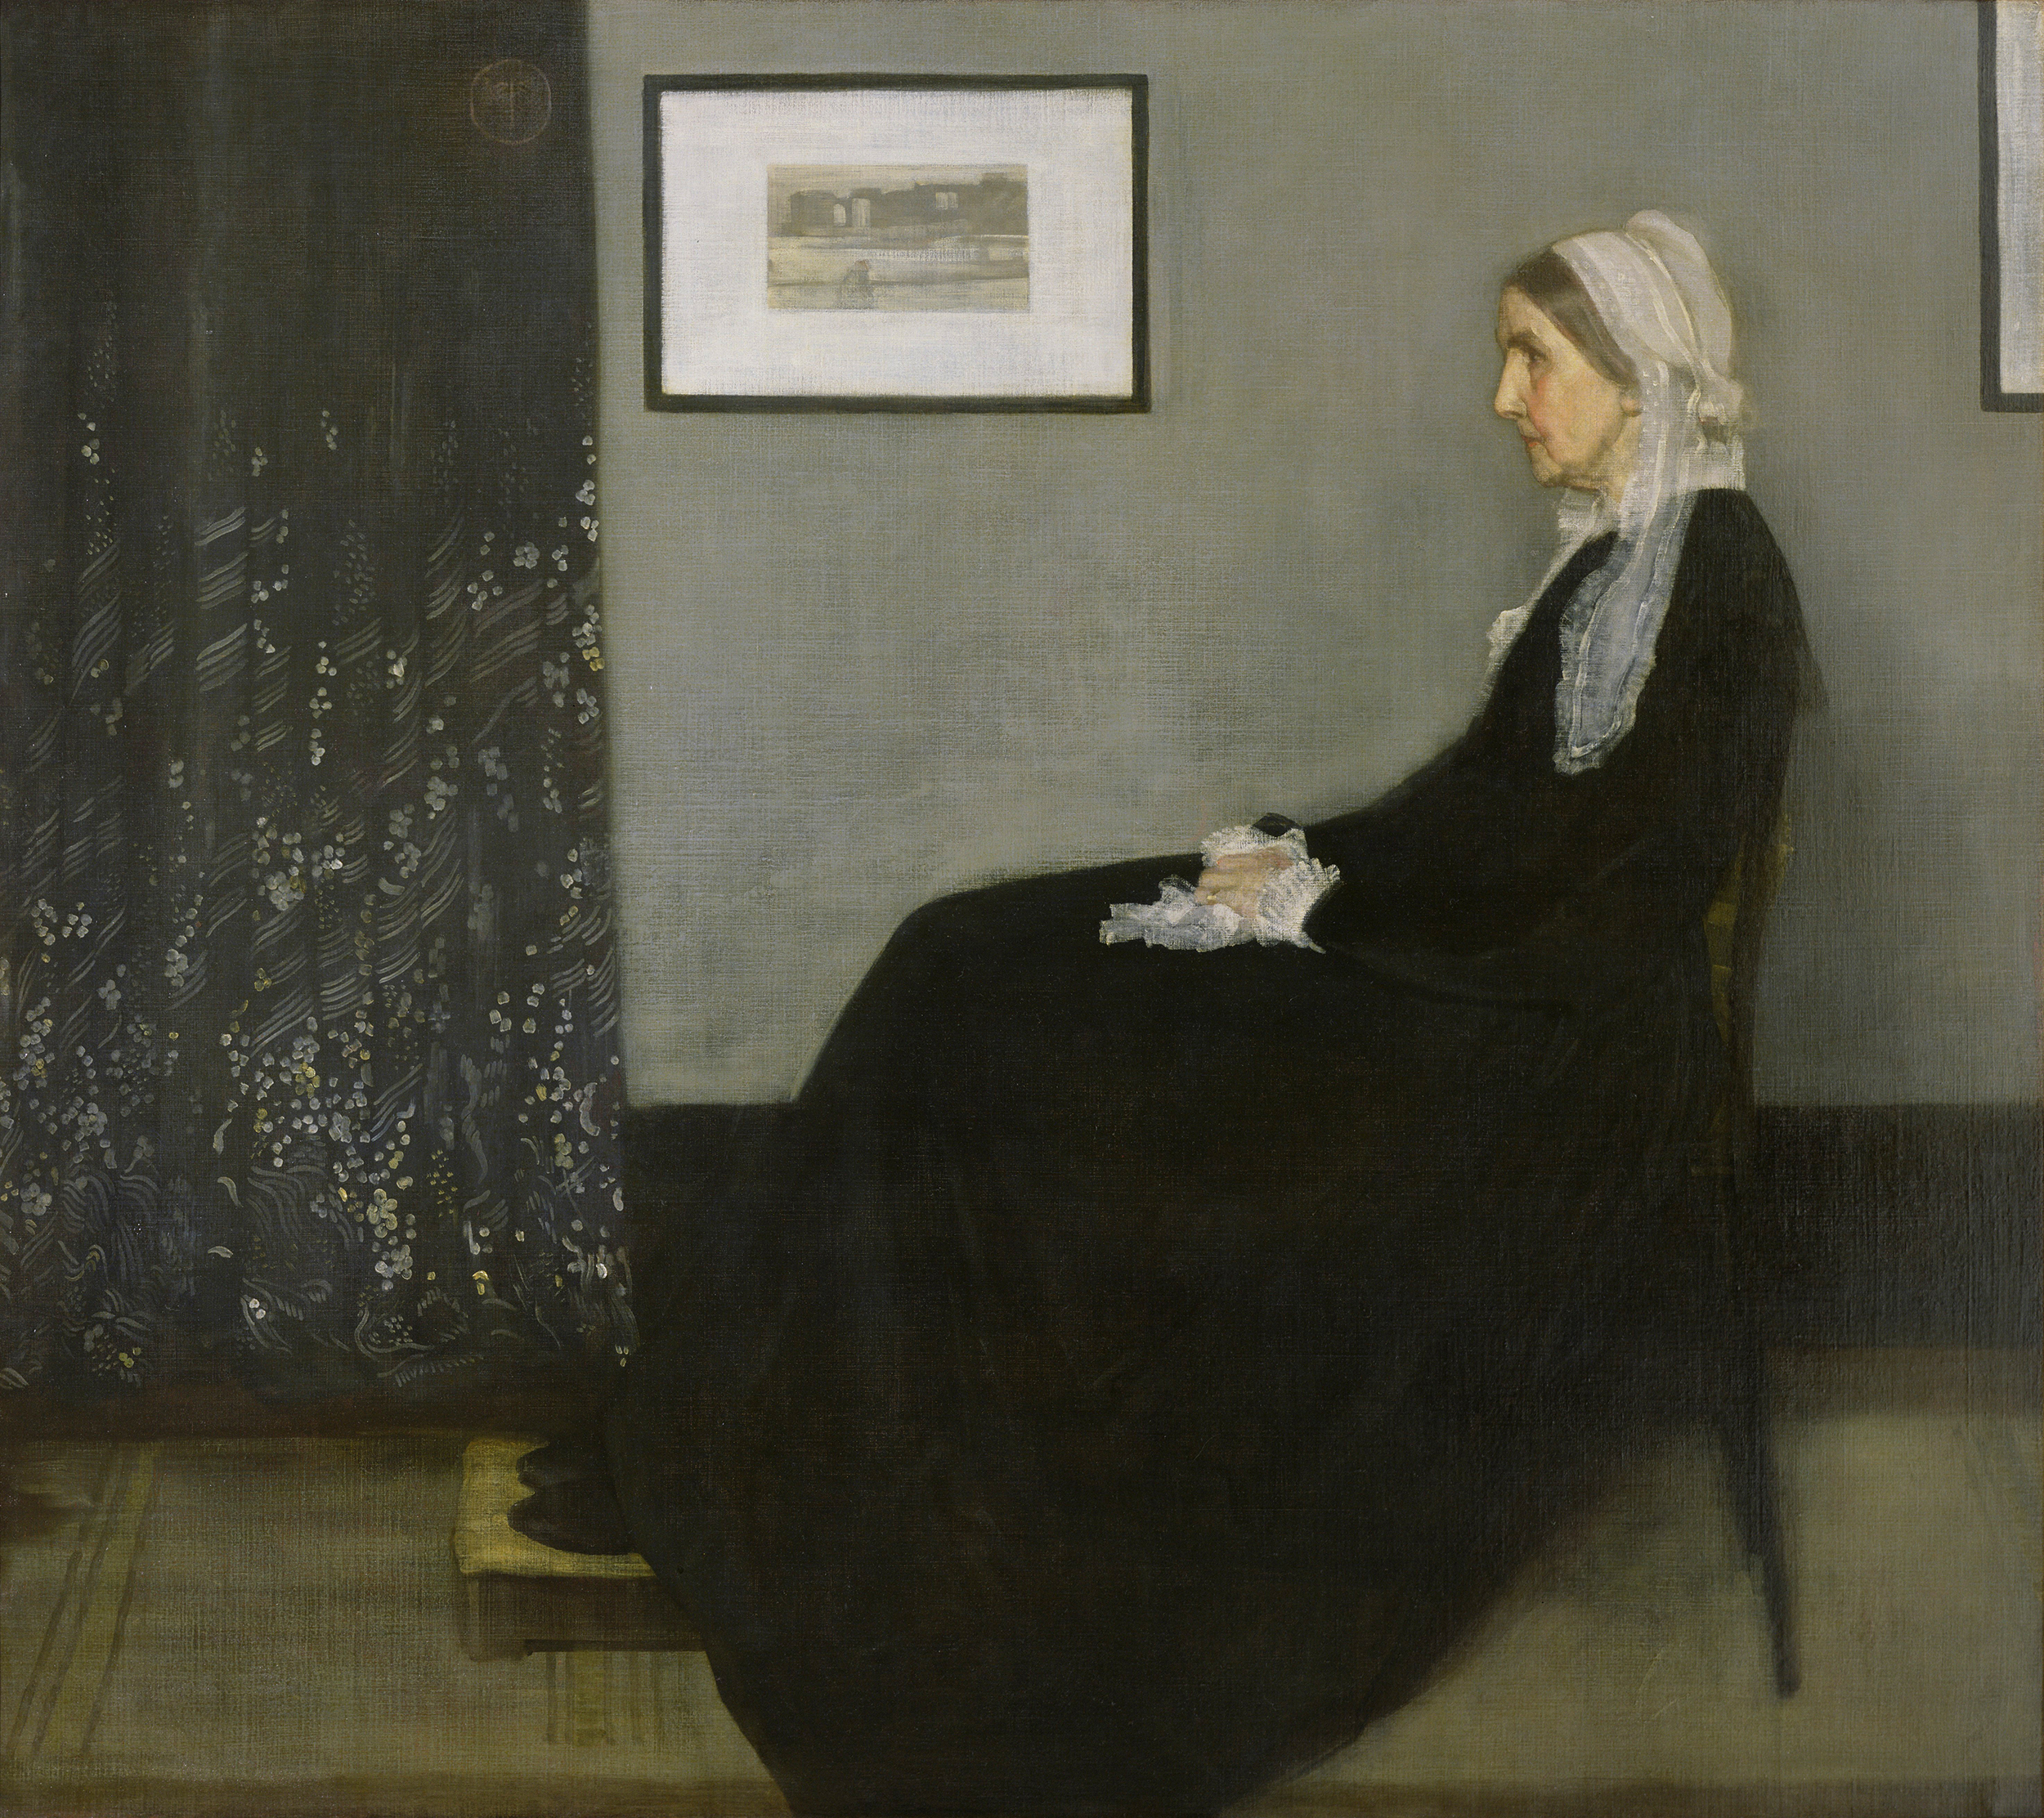 James Abbott McNeill Whistler (American, 1834-1903), 'Arrangement in Grey and Black No. 1,' popularly known as 'Whistler's Mother.' From the collection of Musee d'Orsay, Paris.